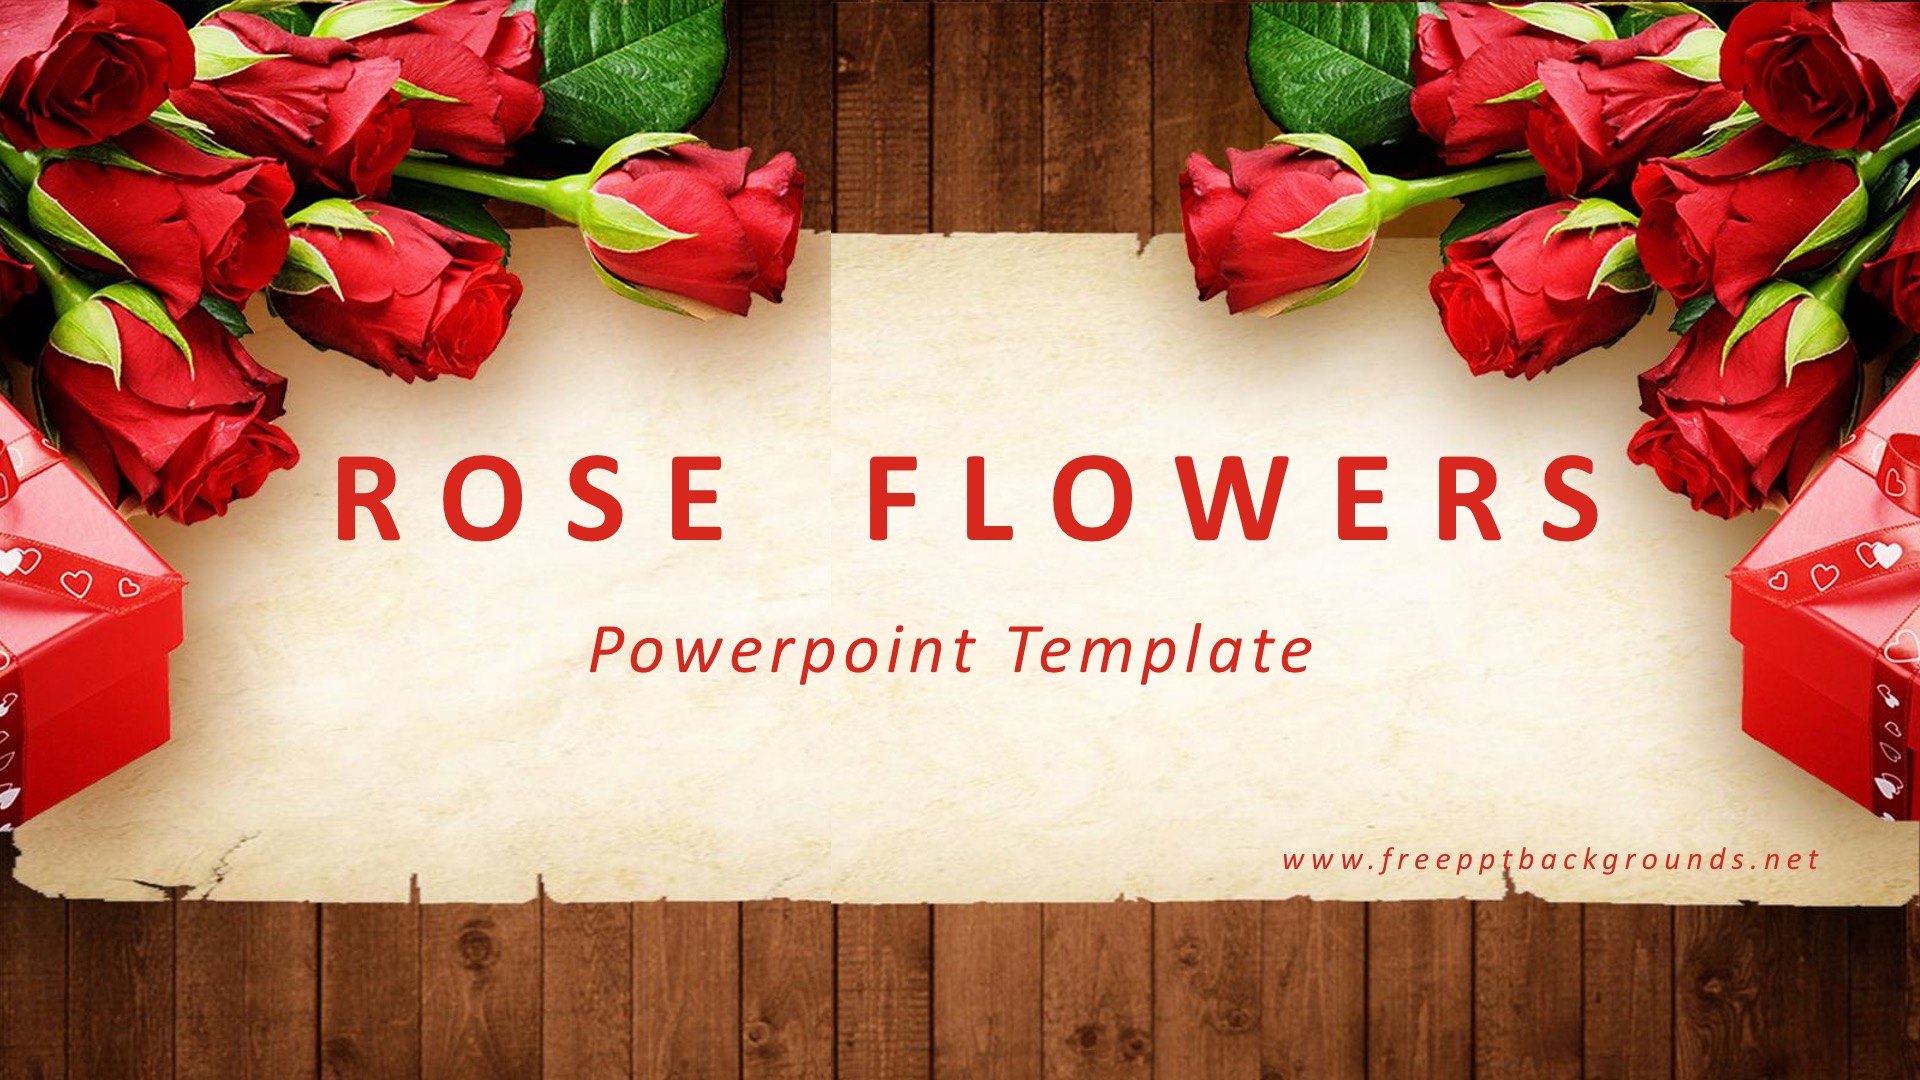 Rose Flower Powerpoint Templates Border & Frames, Flowers, Red Free